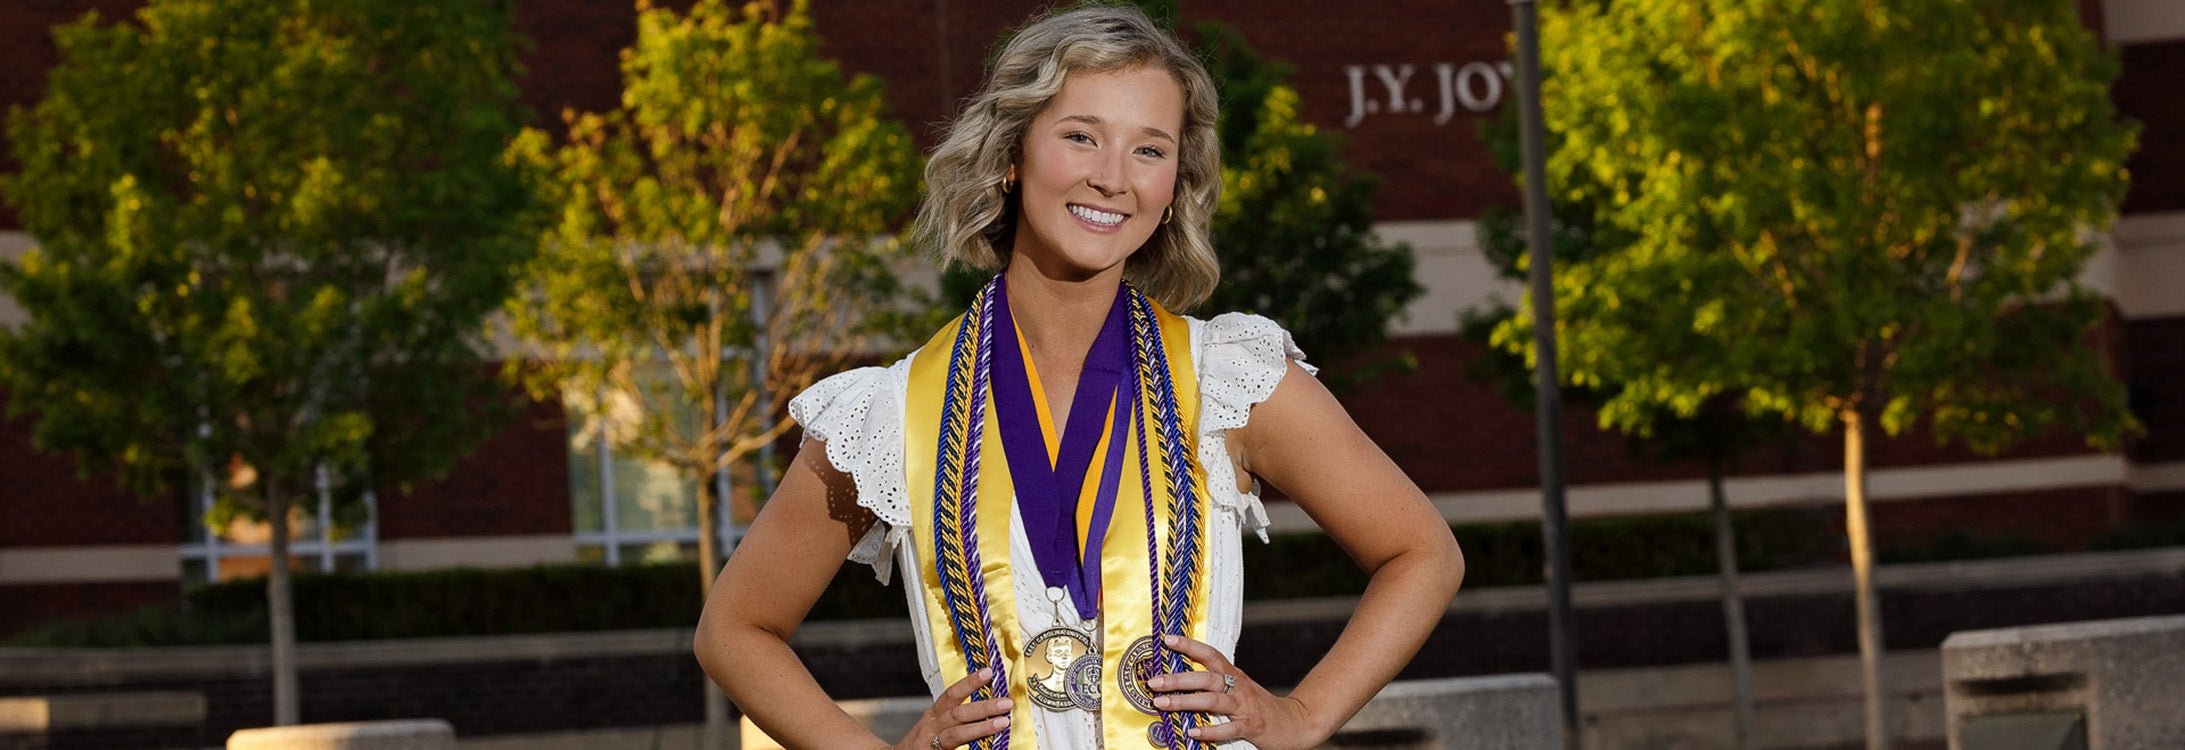 Stepping out of her shell during her time at East Carolina University led senior Wrenn Whitfield to find her home at ECU.